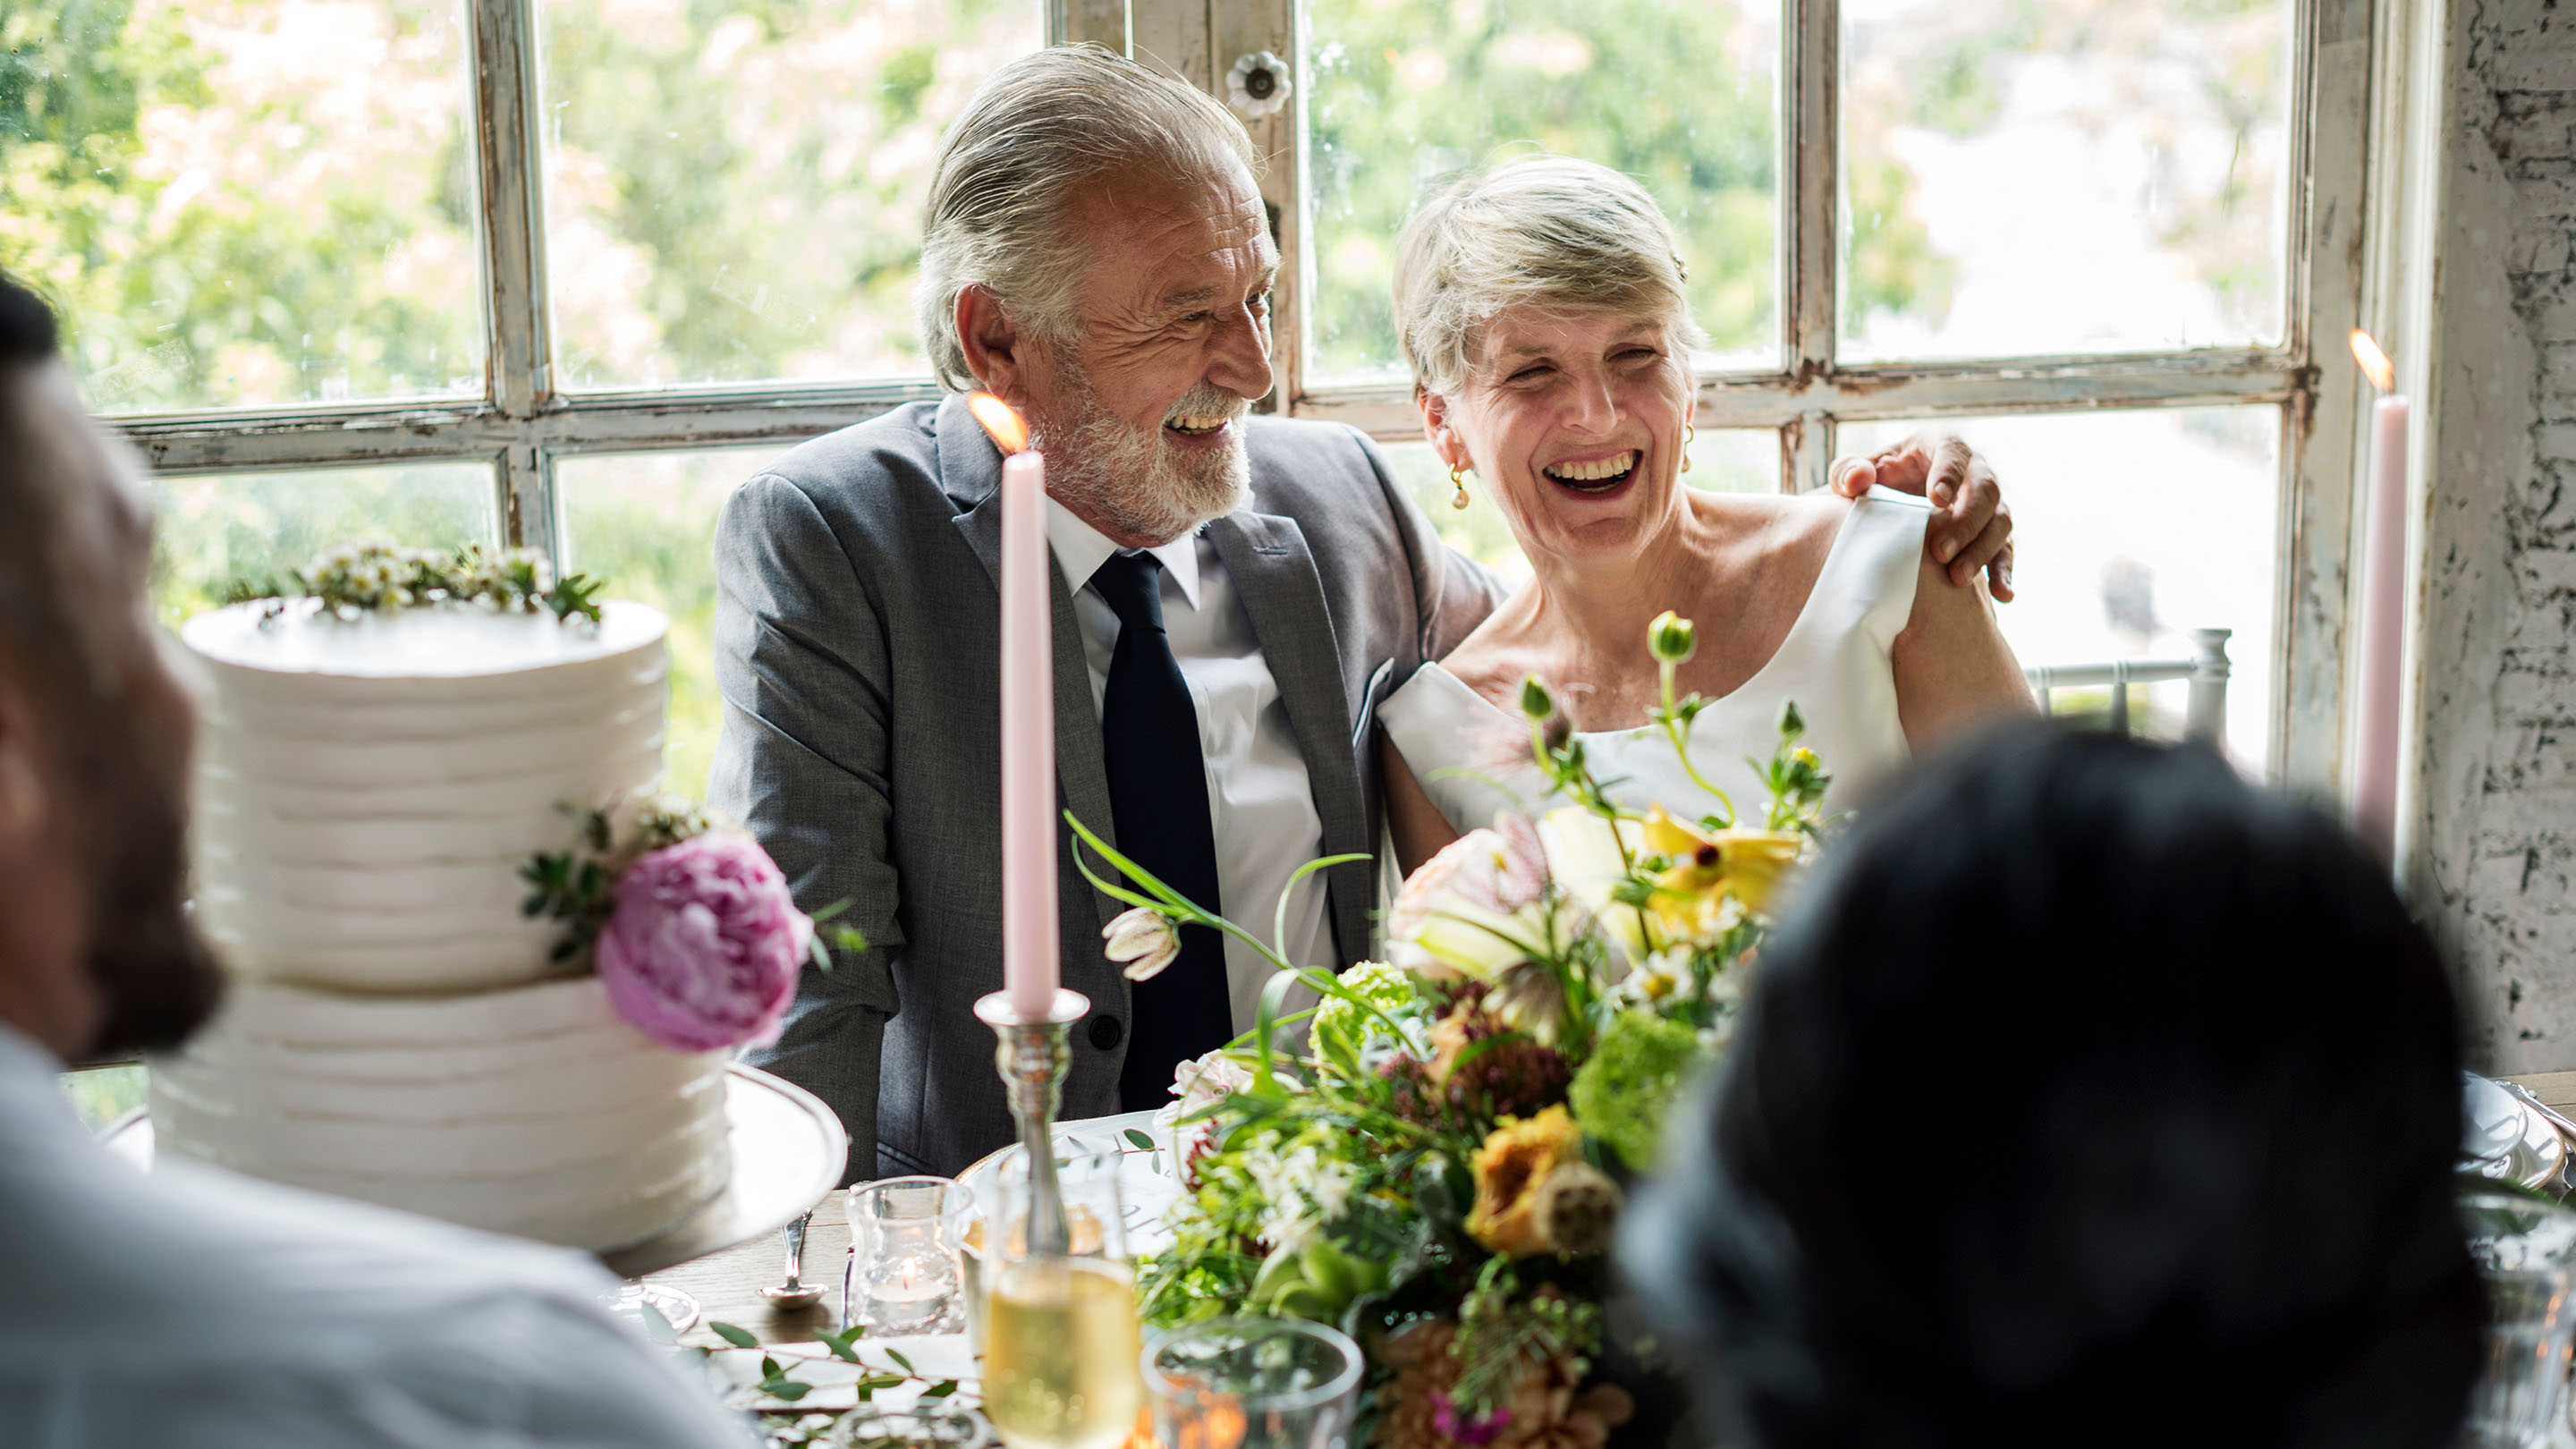 Senior couple sitting together cheerful at a wedding